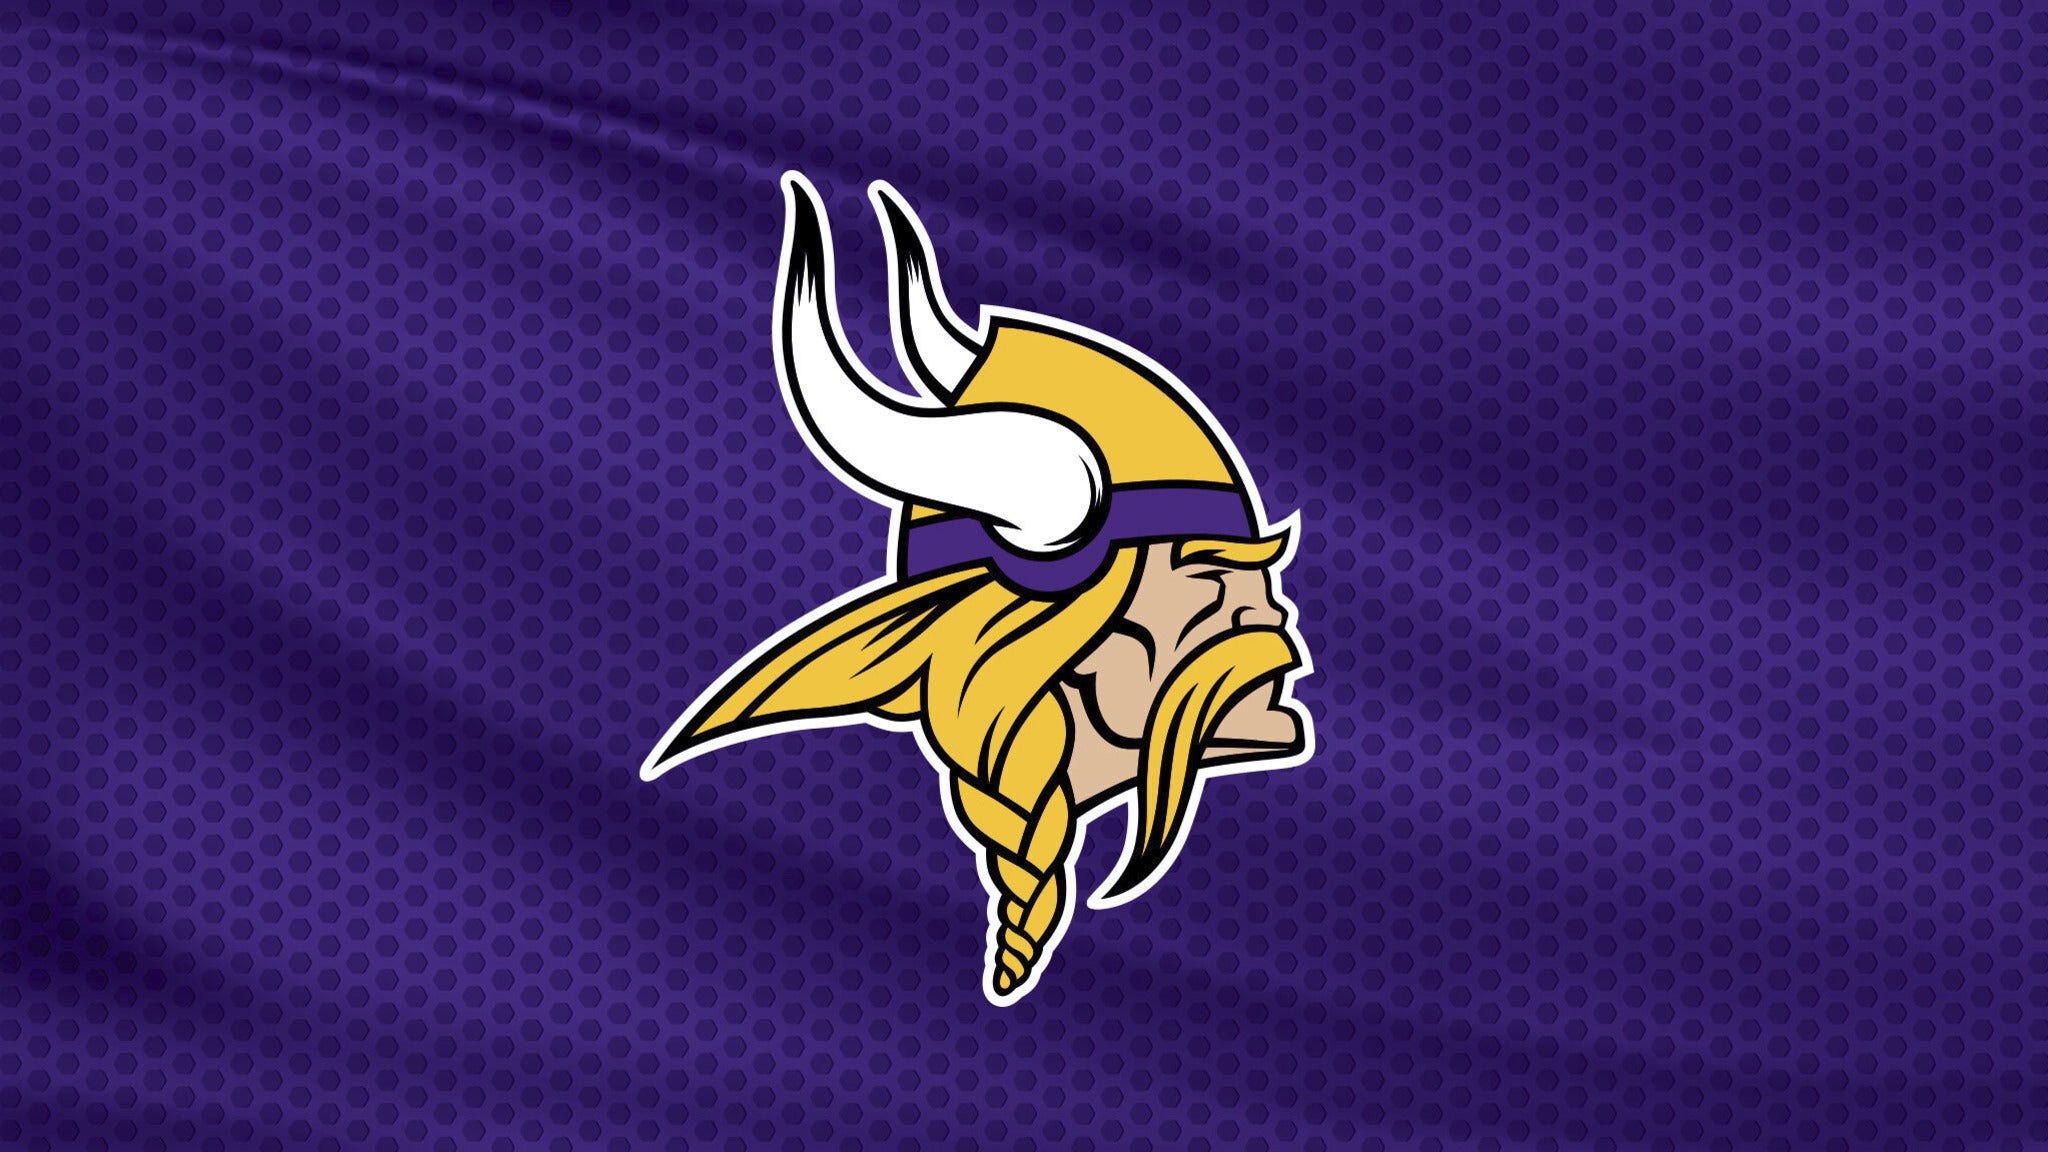 vikings tickets prices